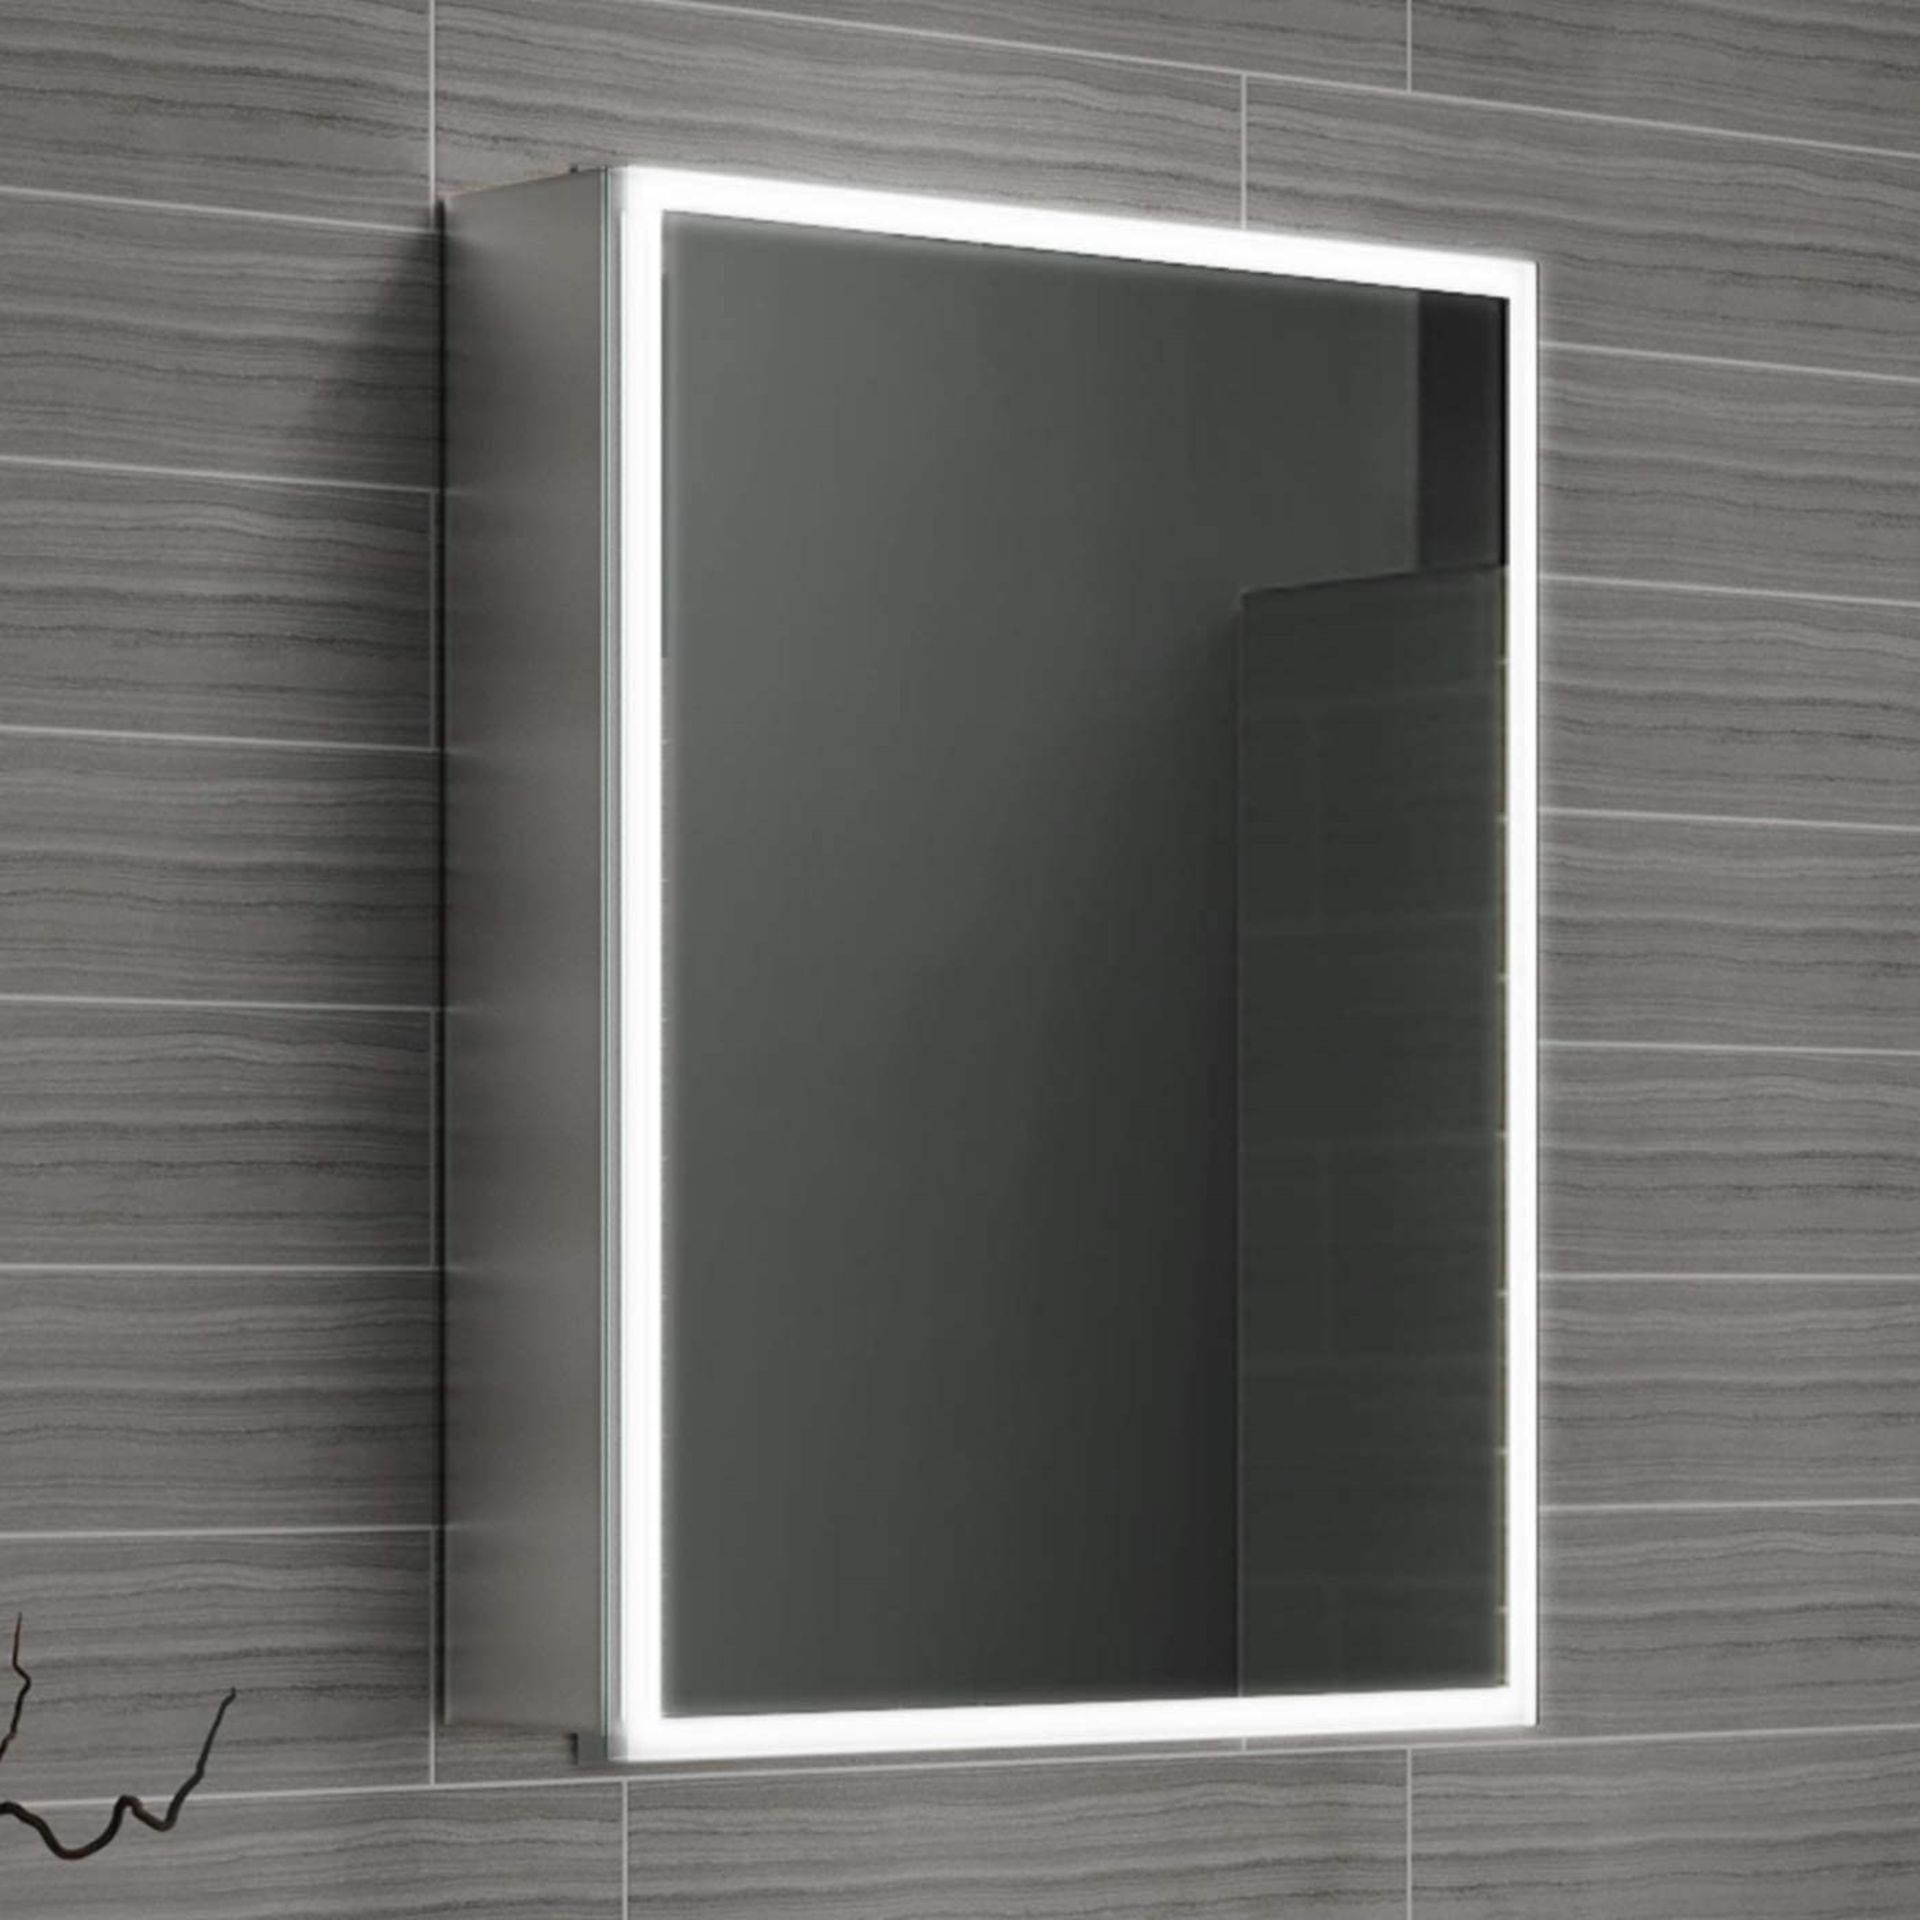 NEW 450x600 Cosmic Illuminated LED Mirror Cabinet. RRP £499.99.MC161.We love this mirror cabinet - Image 2 of 2